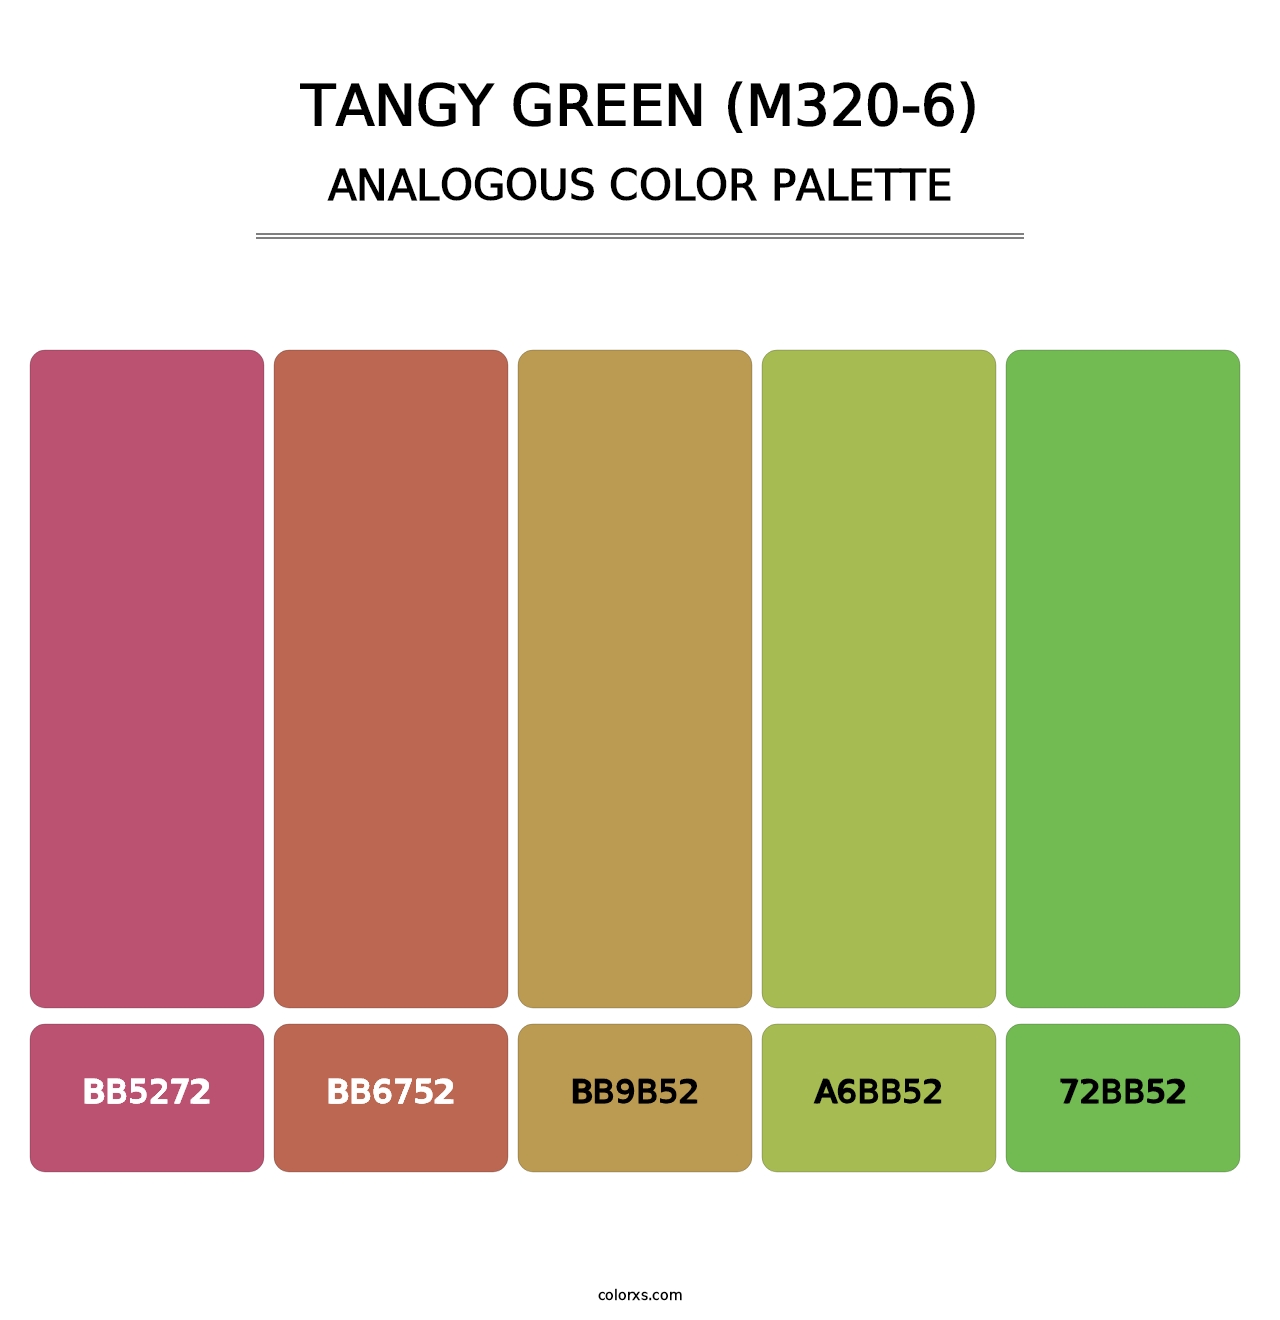 Tangy Green (M320-6) - Analogous Color Palette